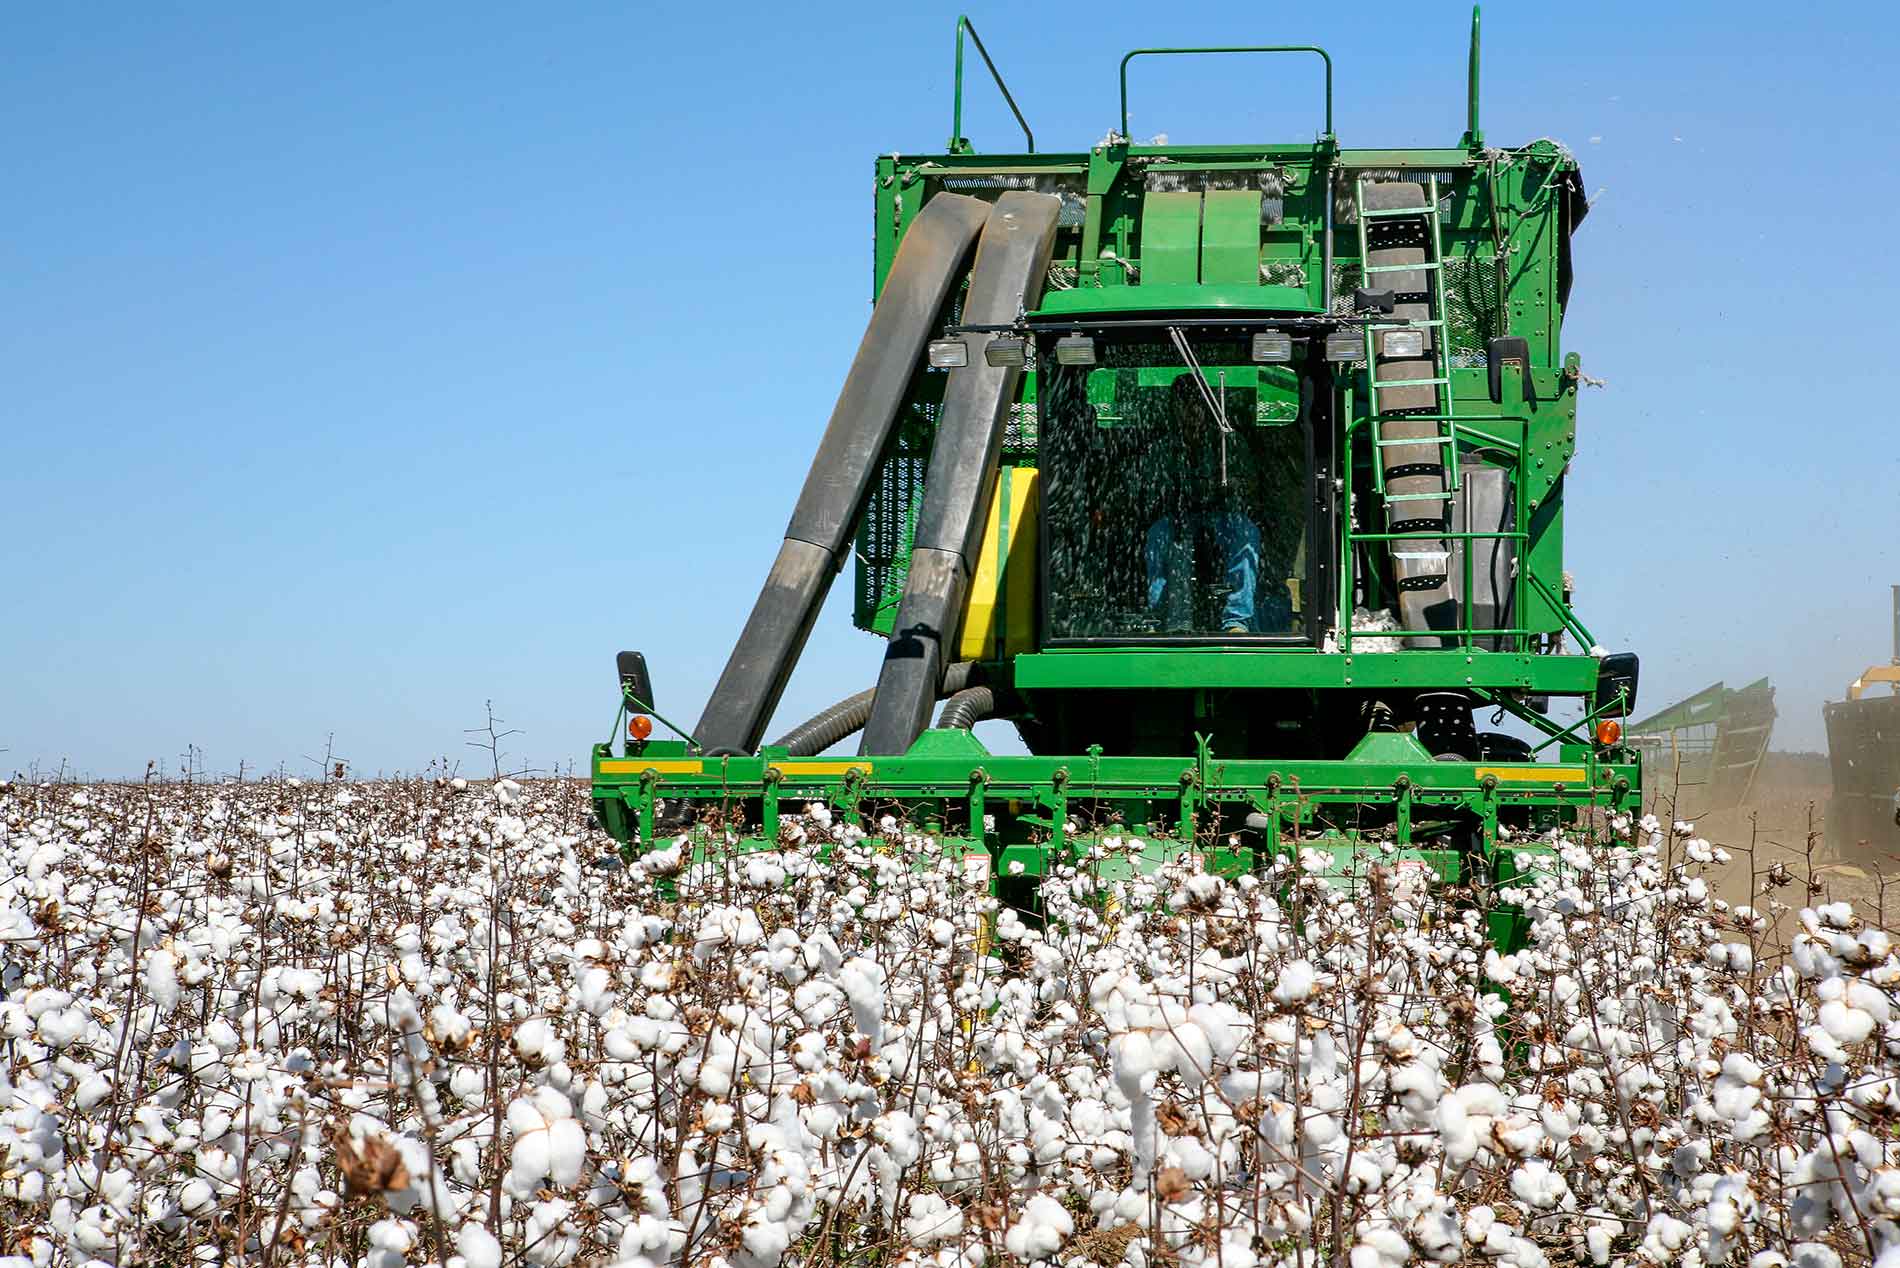 5 Key Benefits of Using Cotton Harvesters in Farming